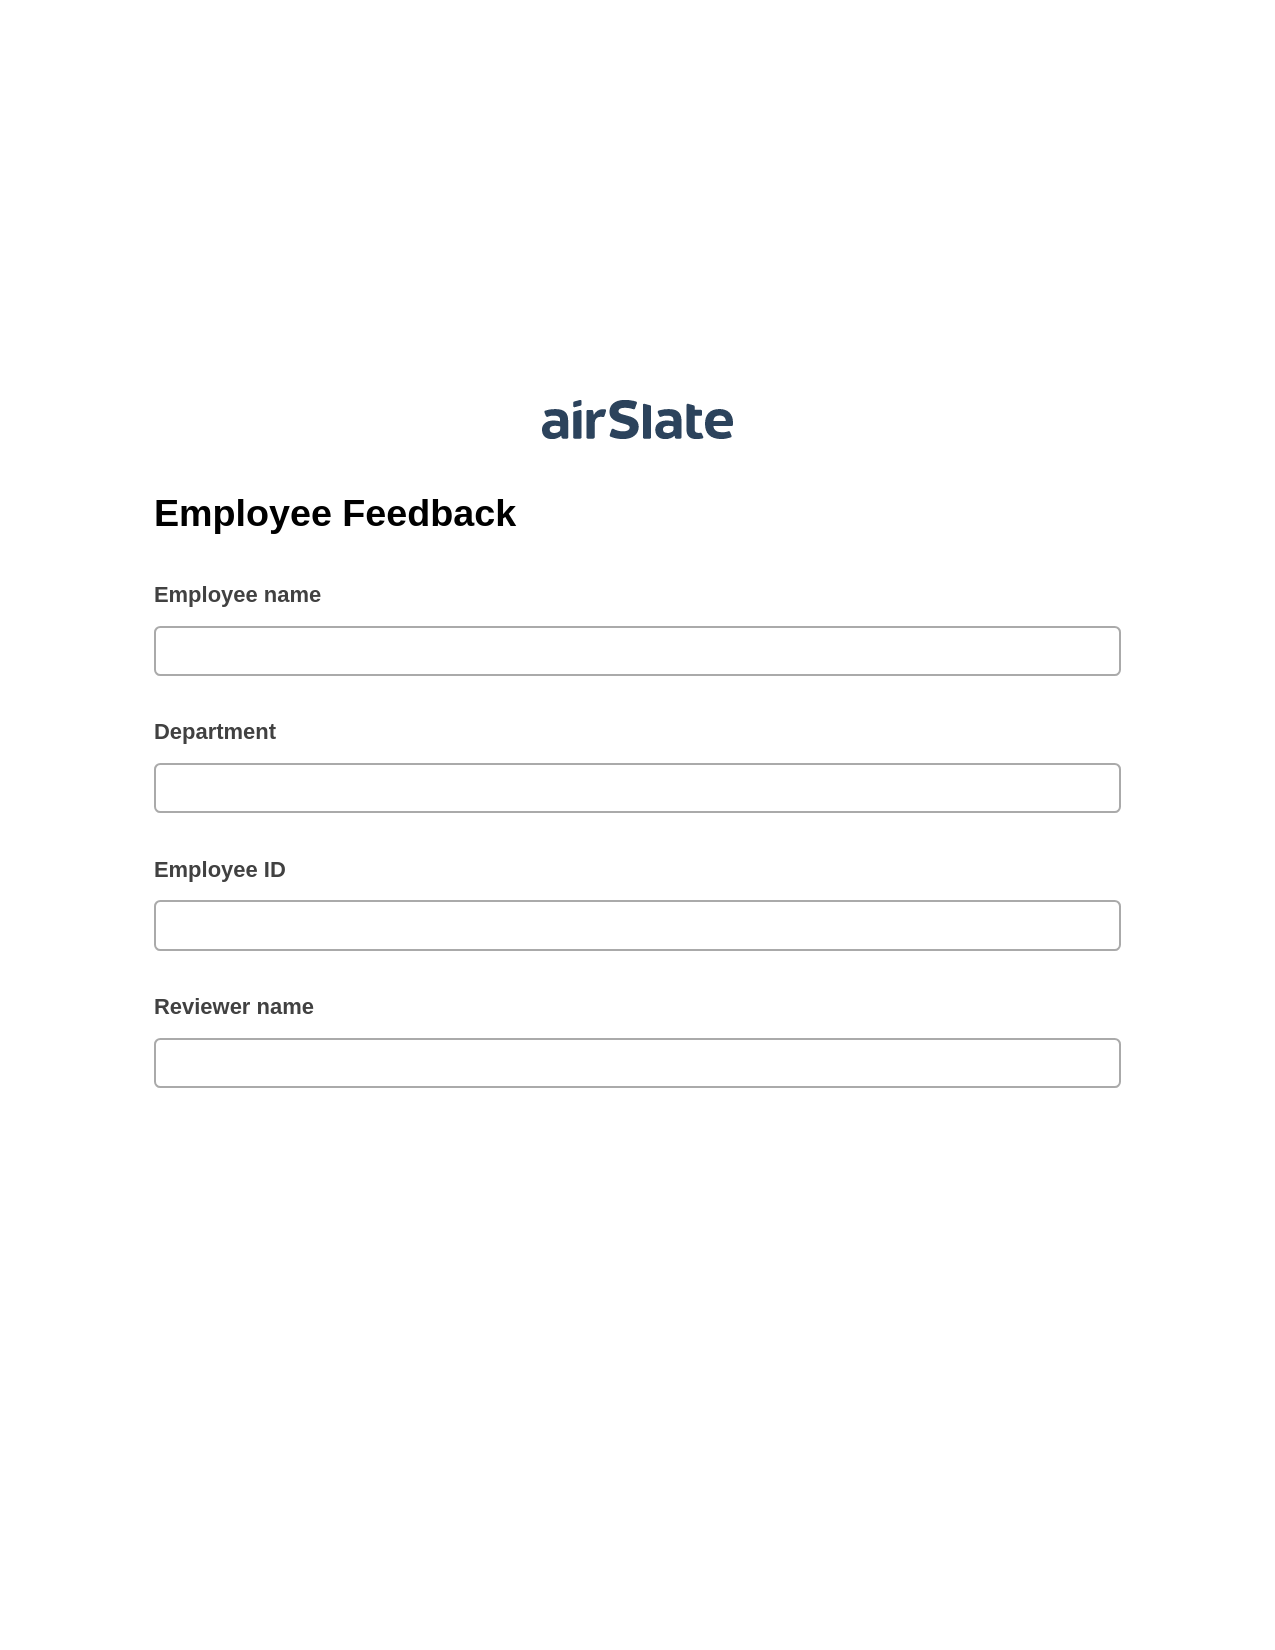 Employee Feedback Pre-fill from Salesforce Record Bot, Unassign Role Bot, Export to Smartsheet